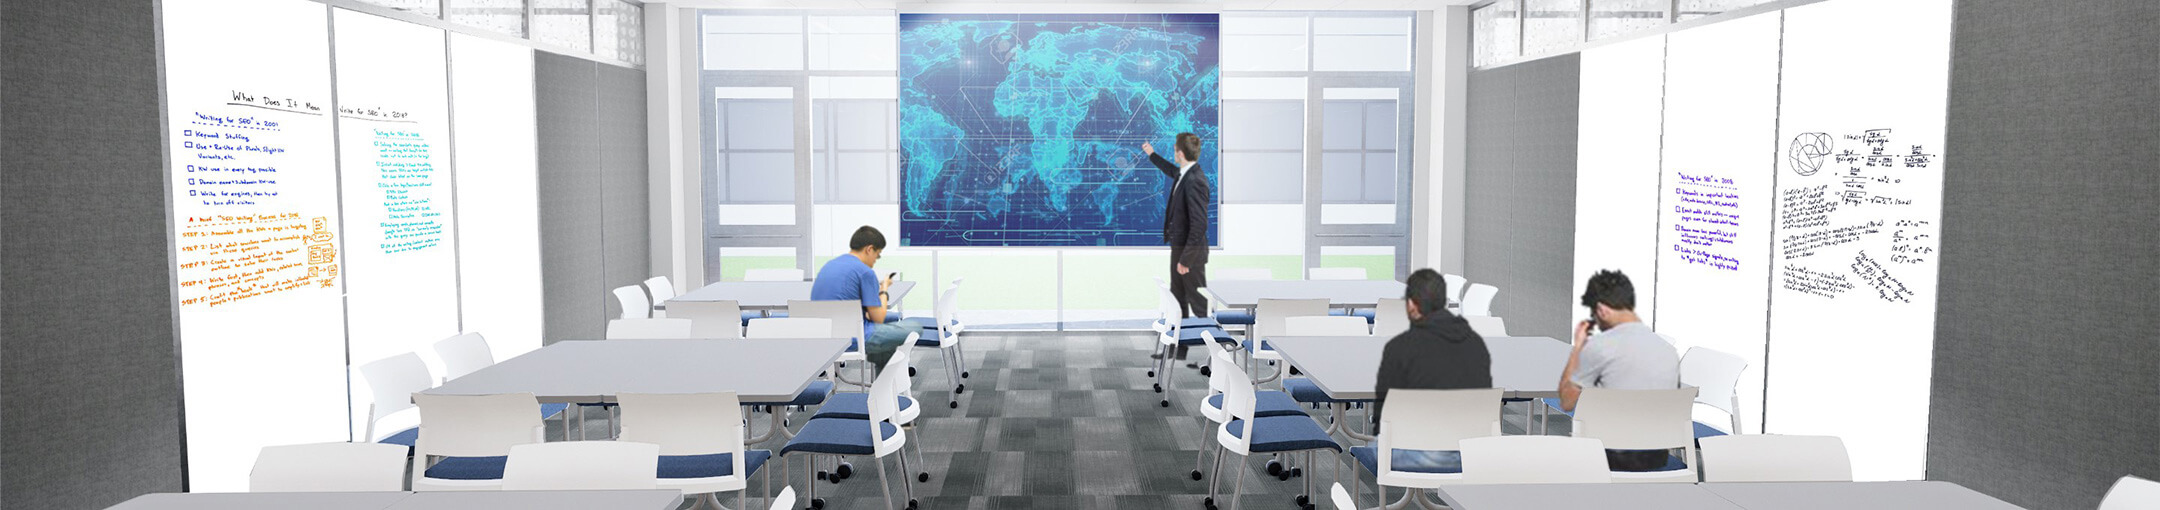 Rendering of a classroom with a large screen in the middle.